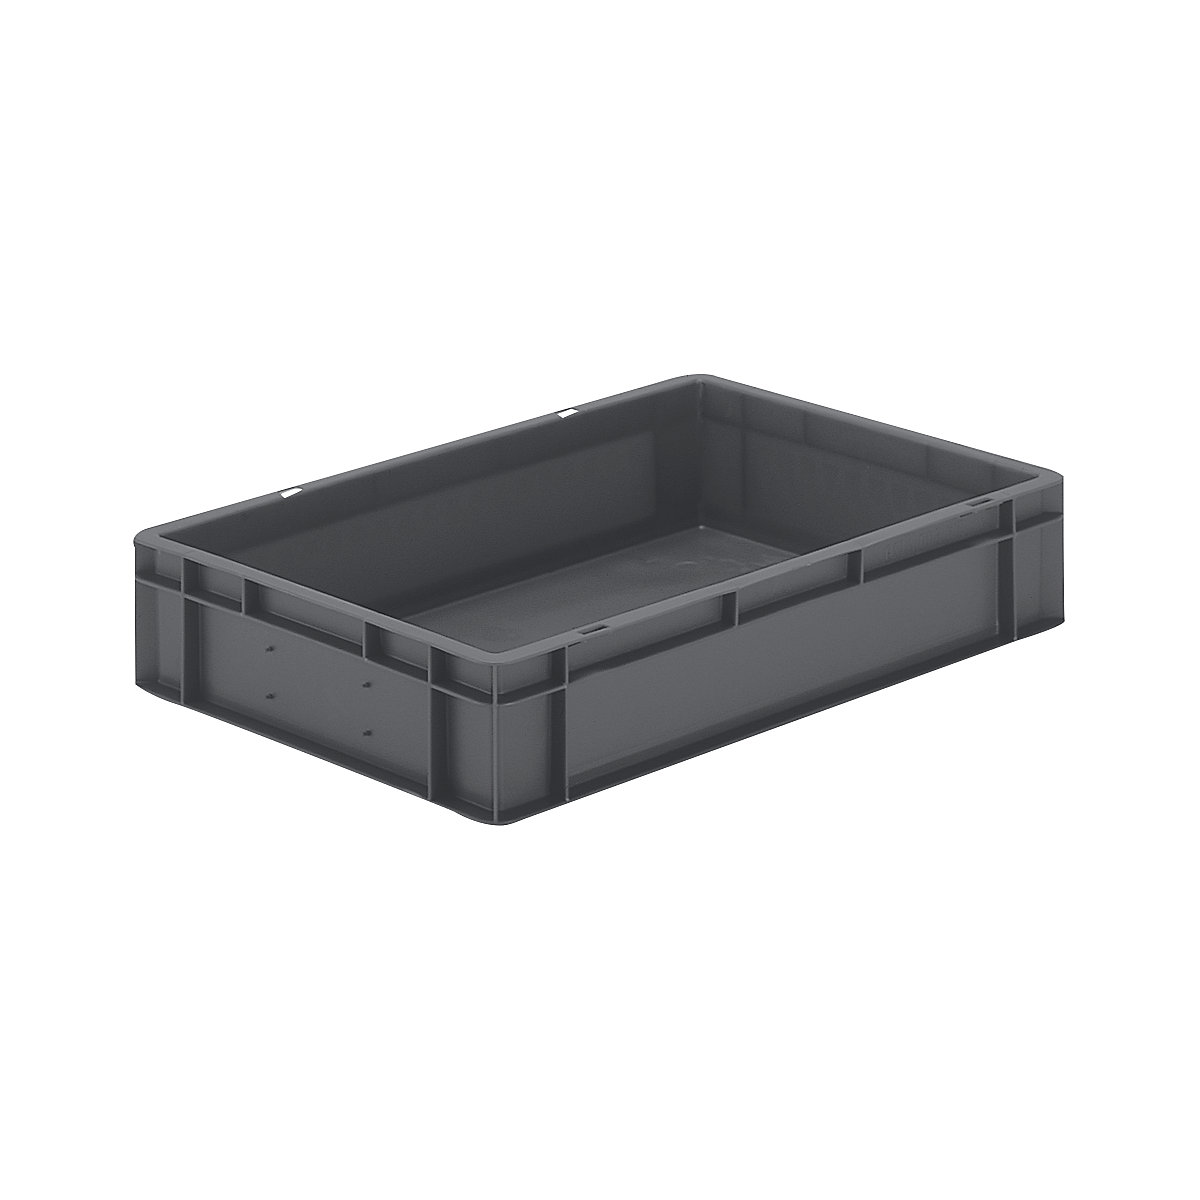 Euro stacking container, closed walls and base, LxWxH 600 x 400 x 120 mm, grey, pack of 5-8